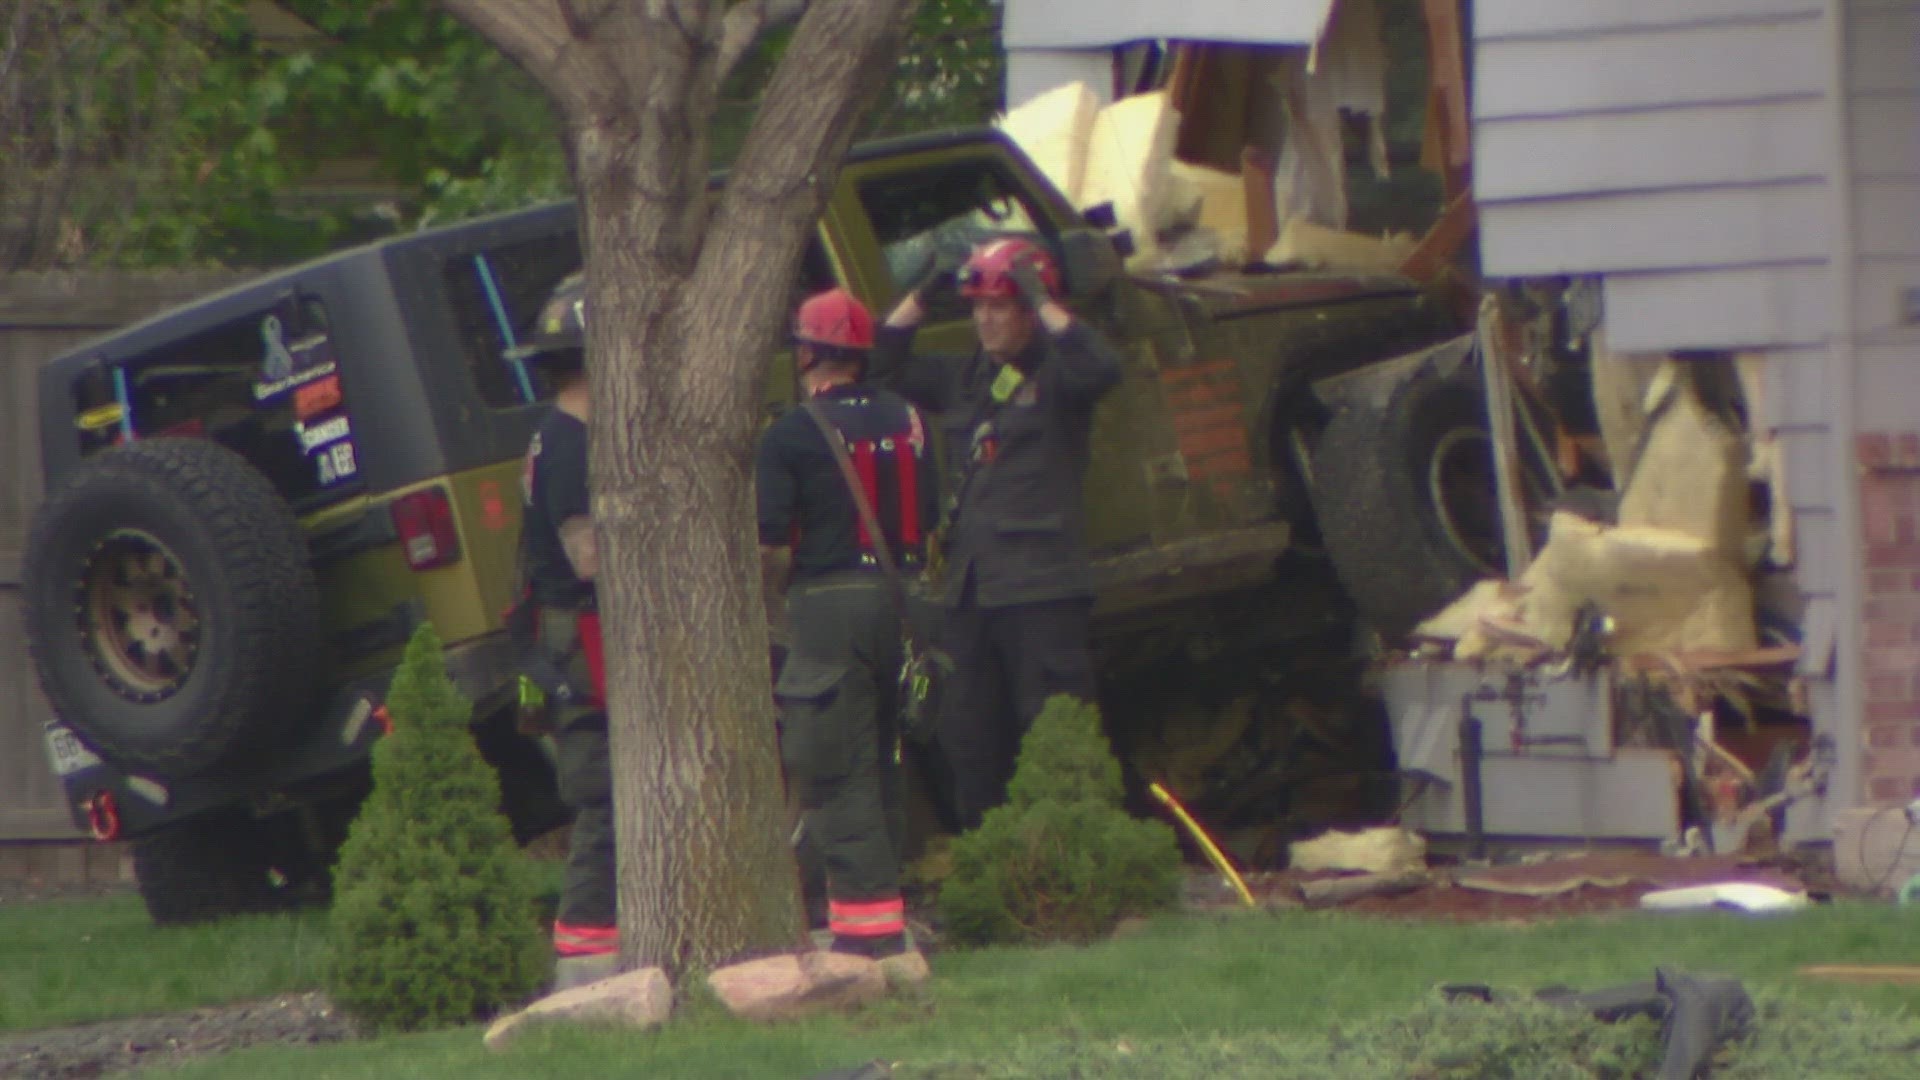 About 15 homes were evacuated due to a severed gas line after the crash.